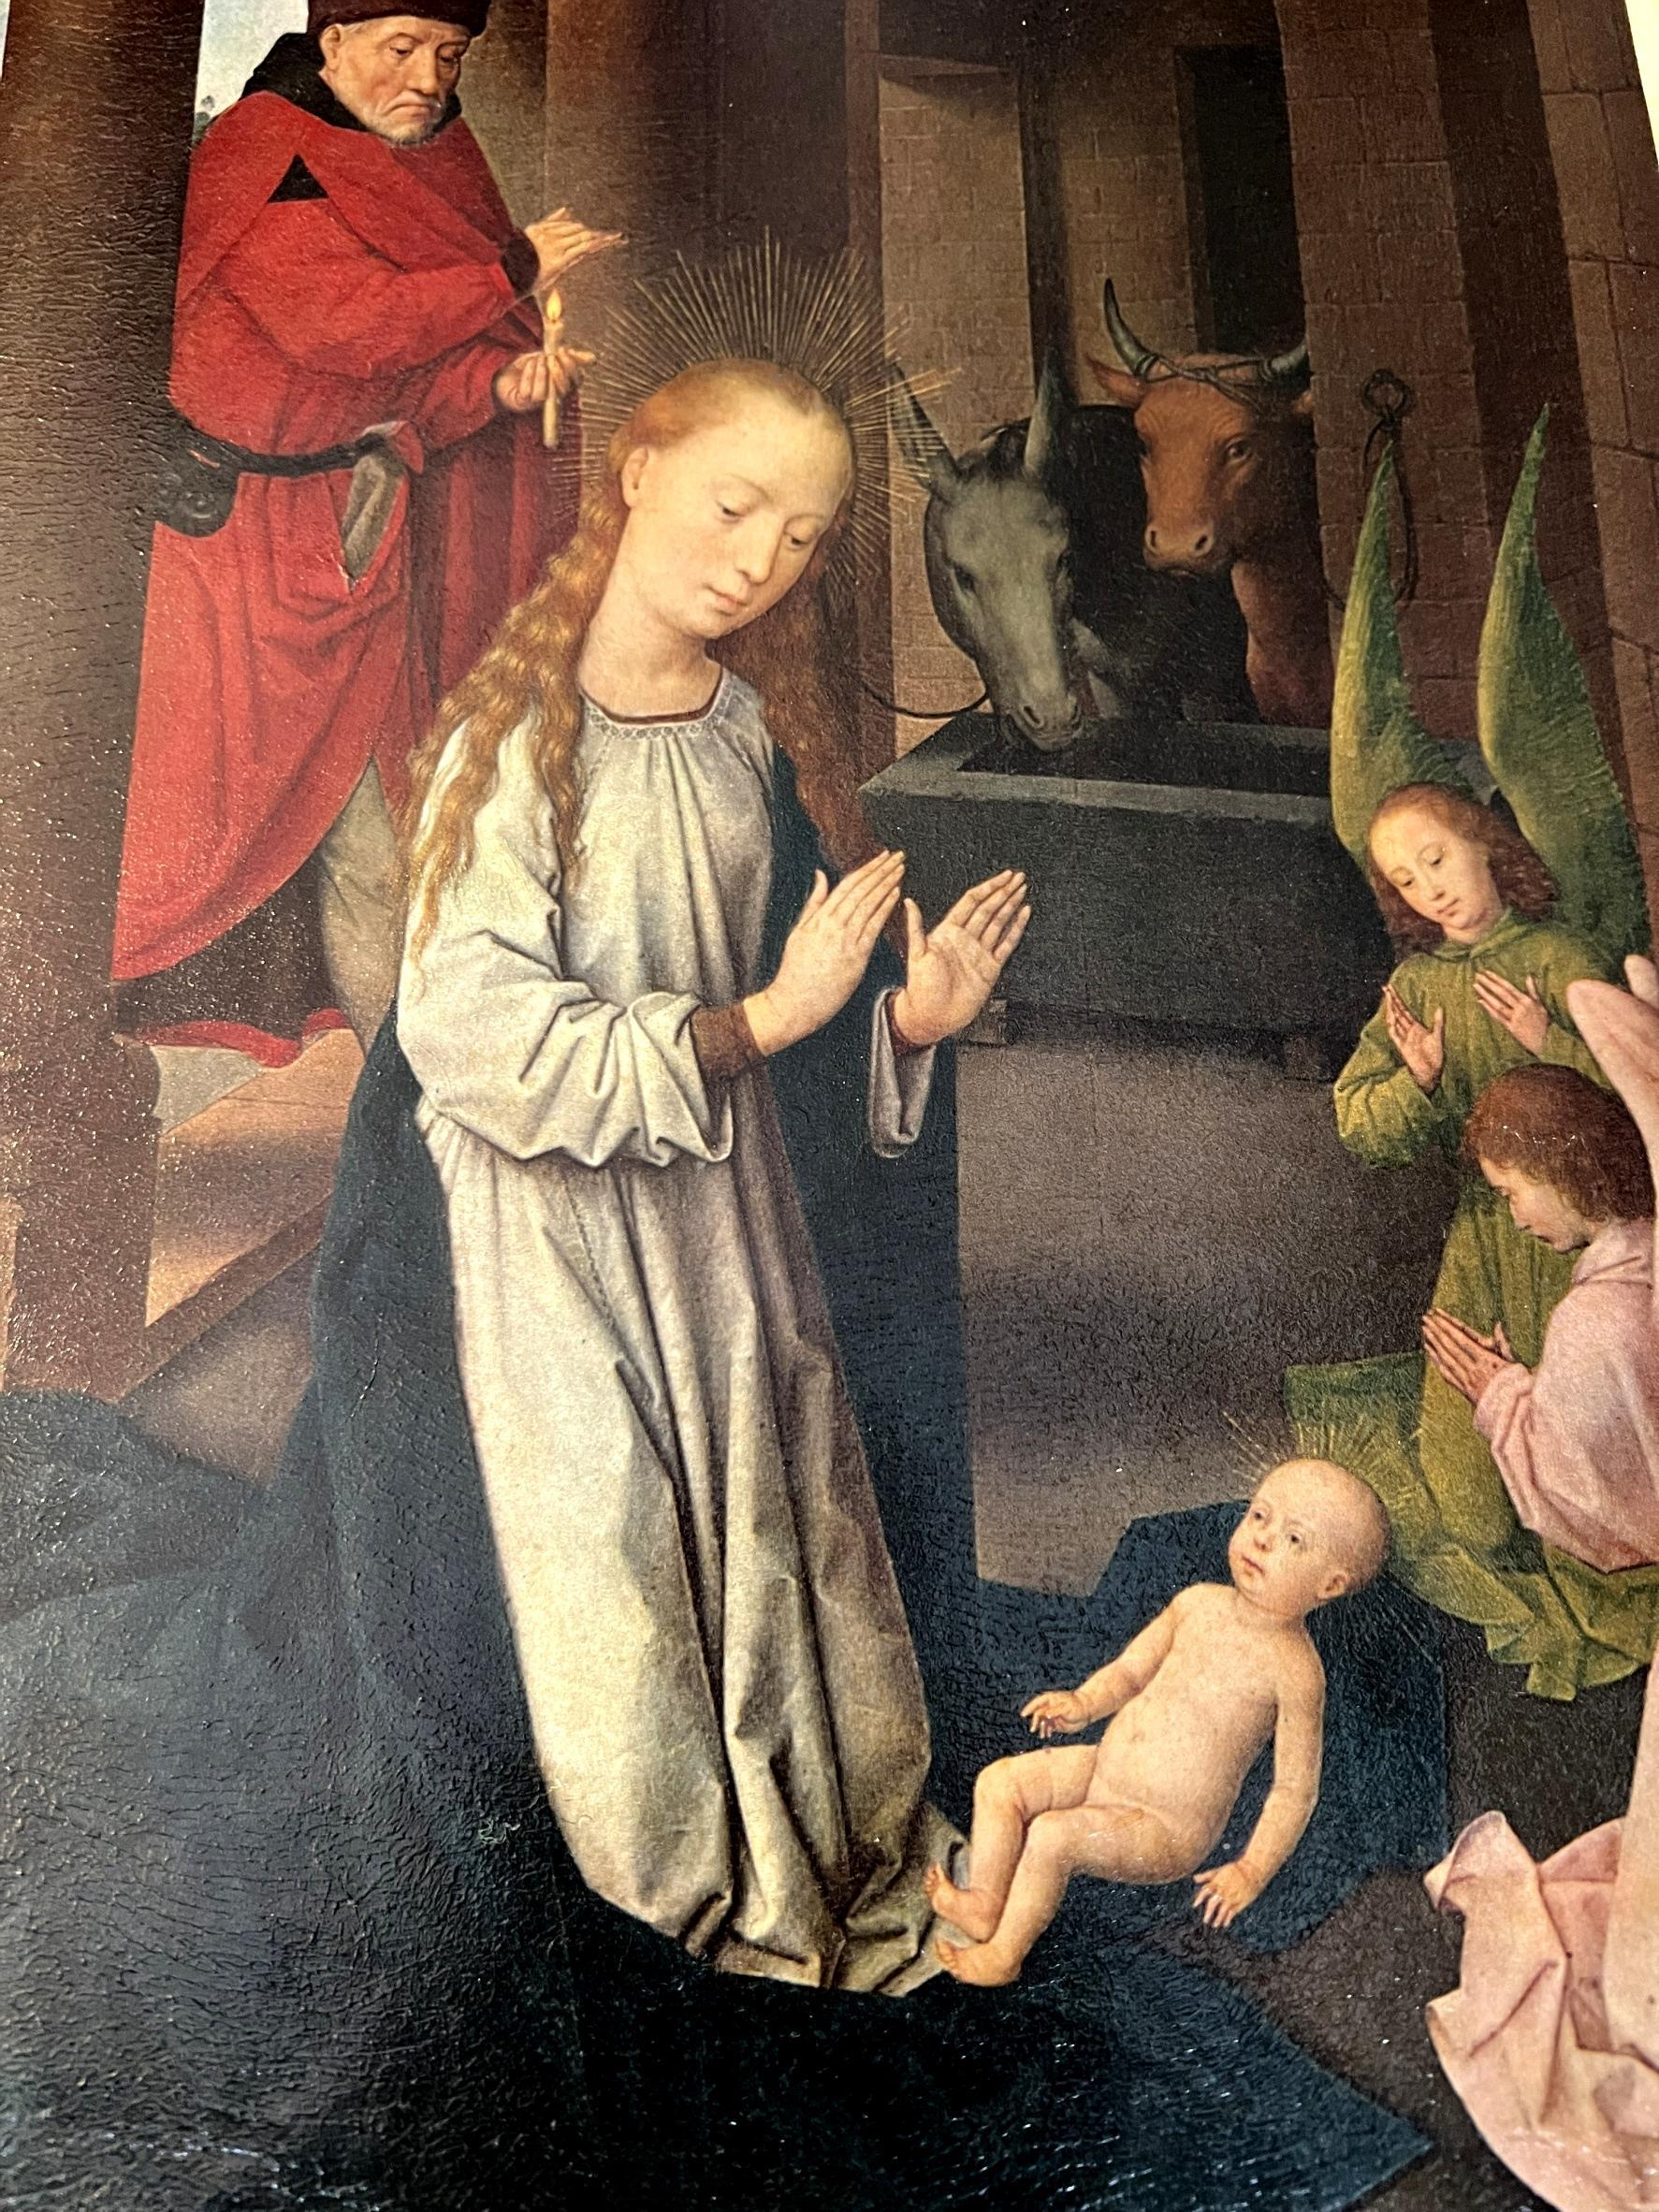 Print on Canvas of "The Nativity"